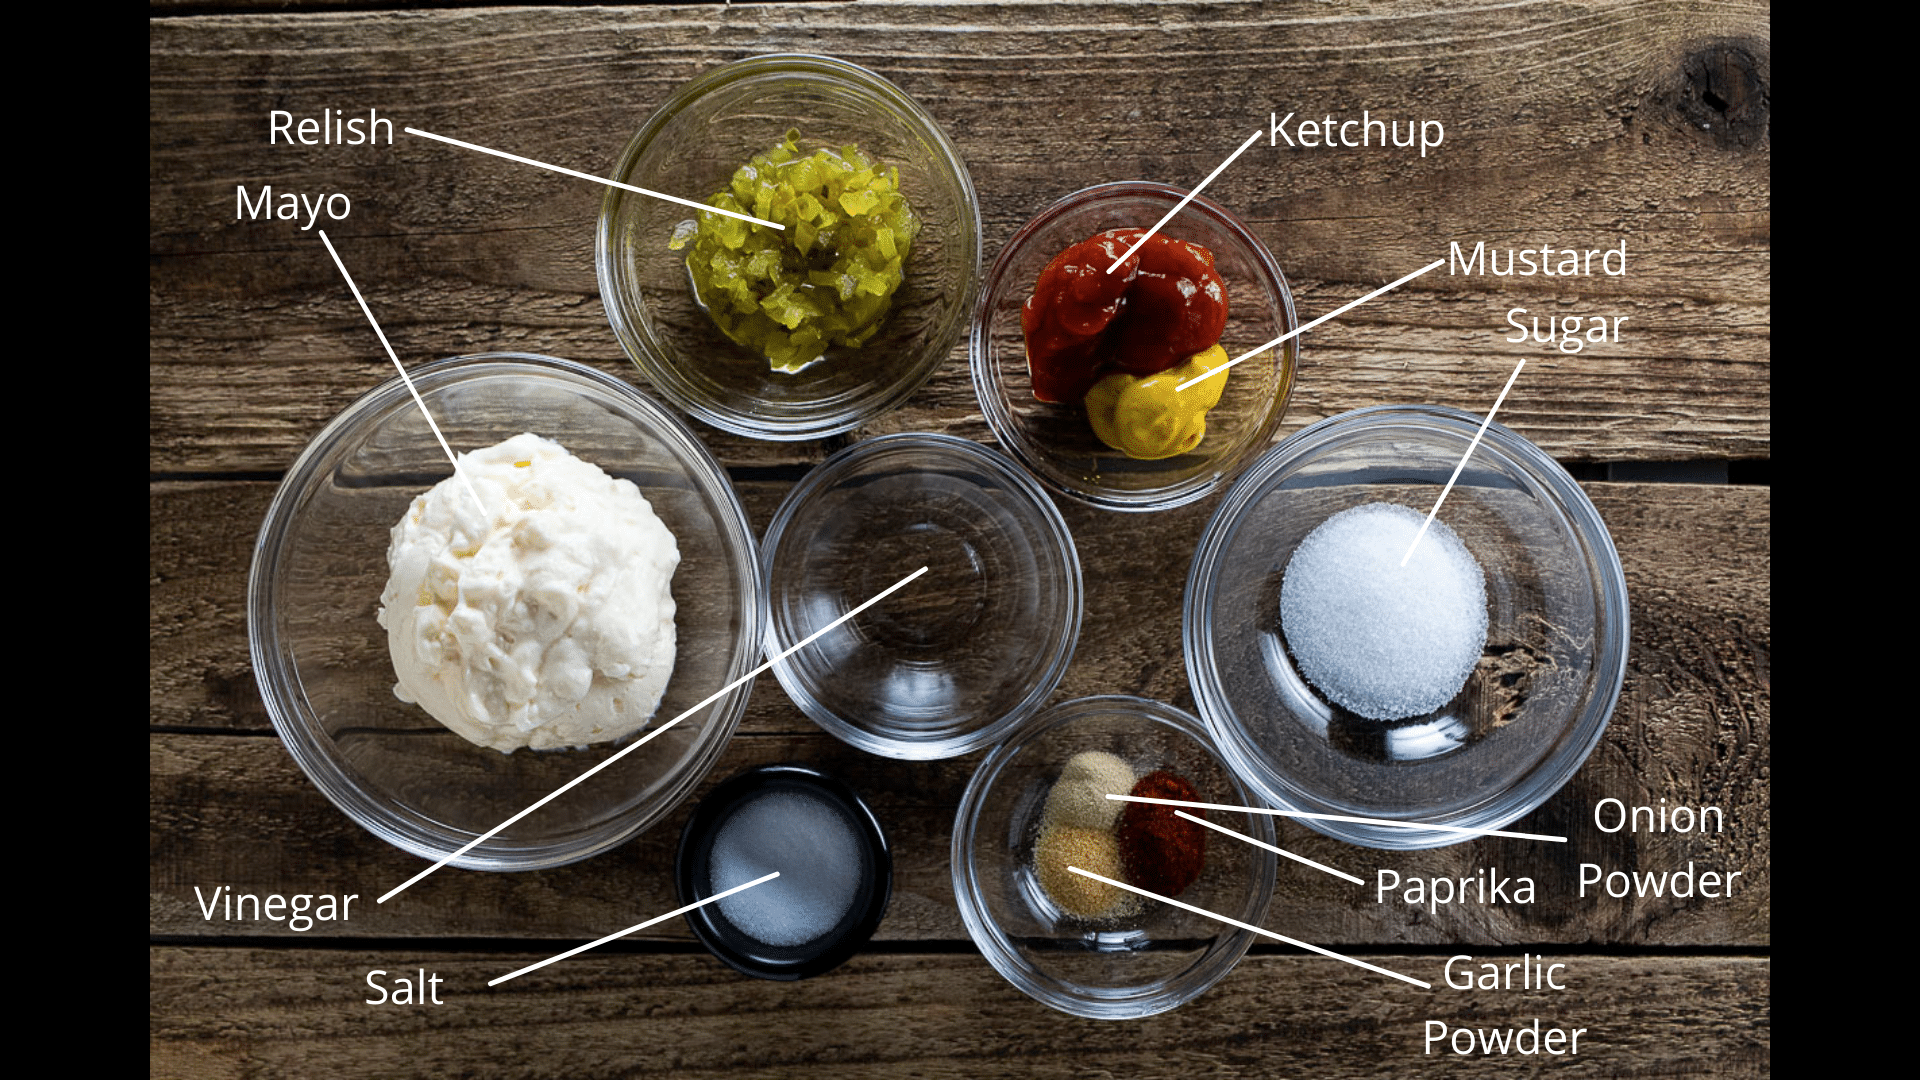 This is an image of all of the ingredients needed to make our copycat big mac sauce.